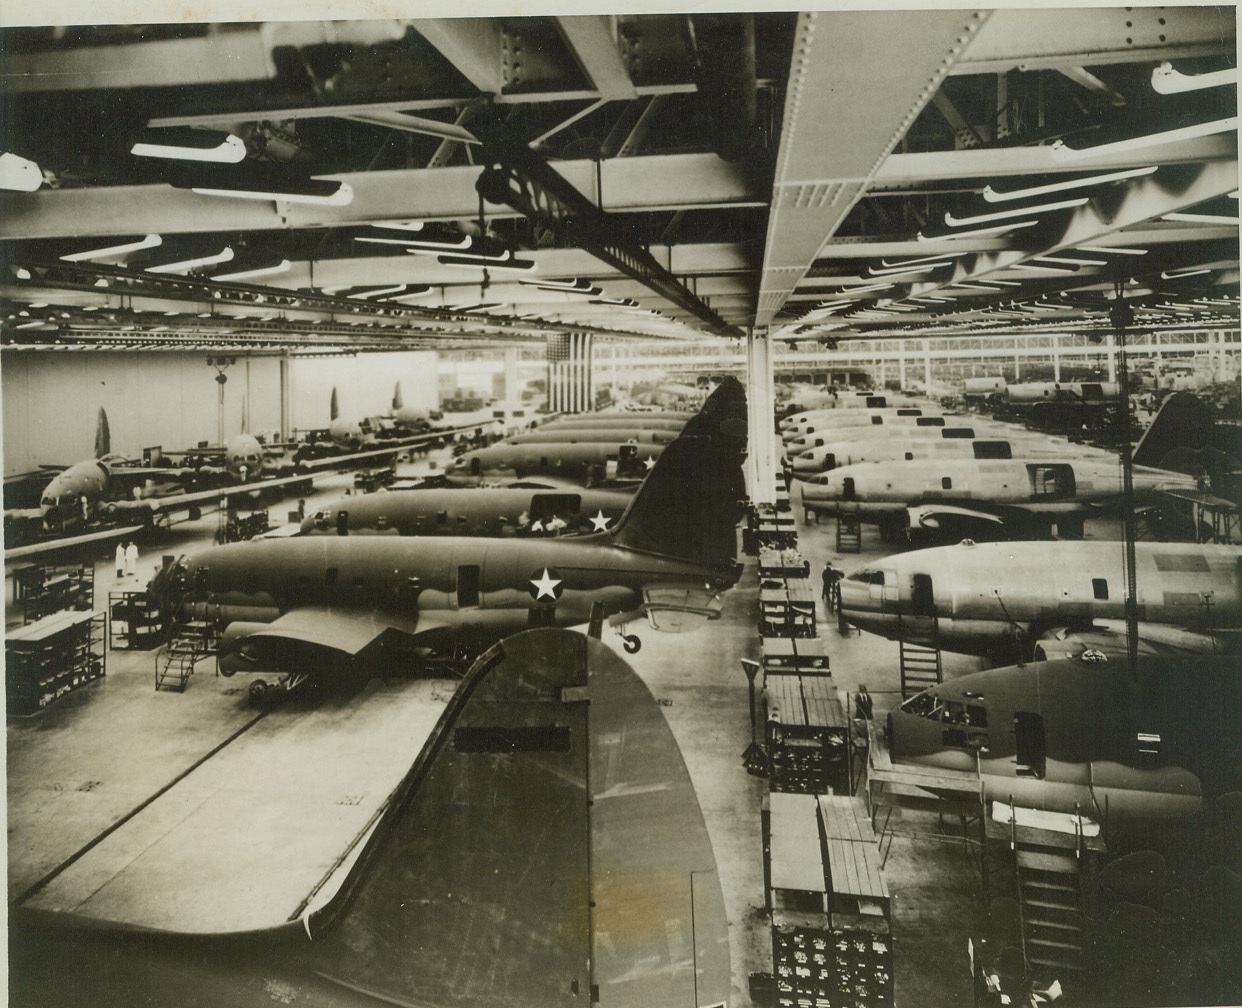 Mass Production For Air Giants, 10/15/1943. Buffalo, N.Y. – The giant Curtiss (C-46) Commando, largest twin-engine cargo aircraft type in the world, will go into mass production on the largest scale ever projected in peace or in war or a transport plane. This photo, taken in one of the two Buffalo plants of Curtiss-Wright Corporation, show the huge twin-engined cargo planes in various stages. When the aircraft in the line at right reach a certain stage in construction, they are transferred to the center line, and finally to the line at the left where they are completed.  Credit: (ACME);